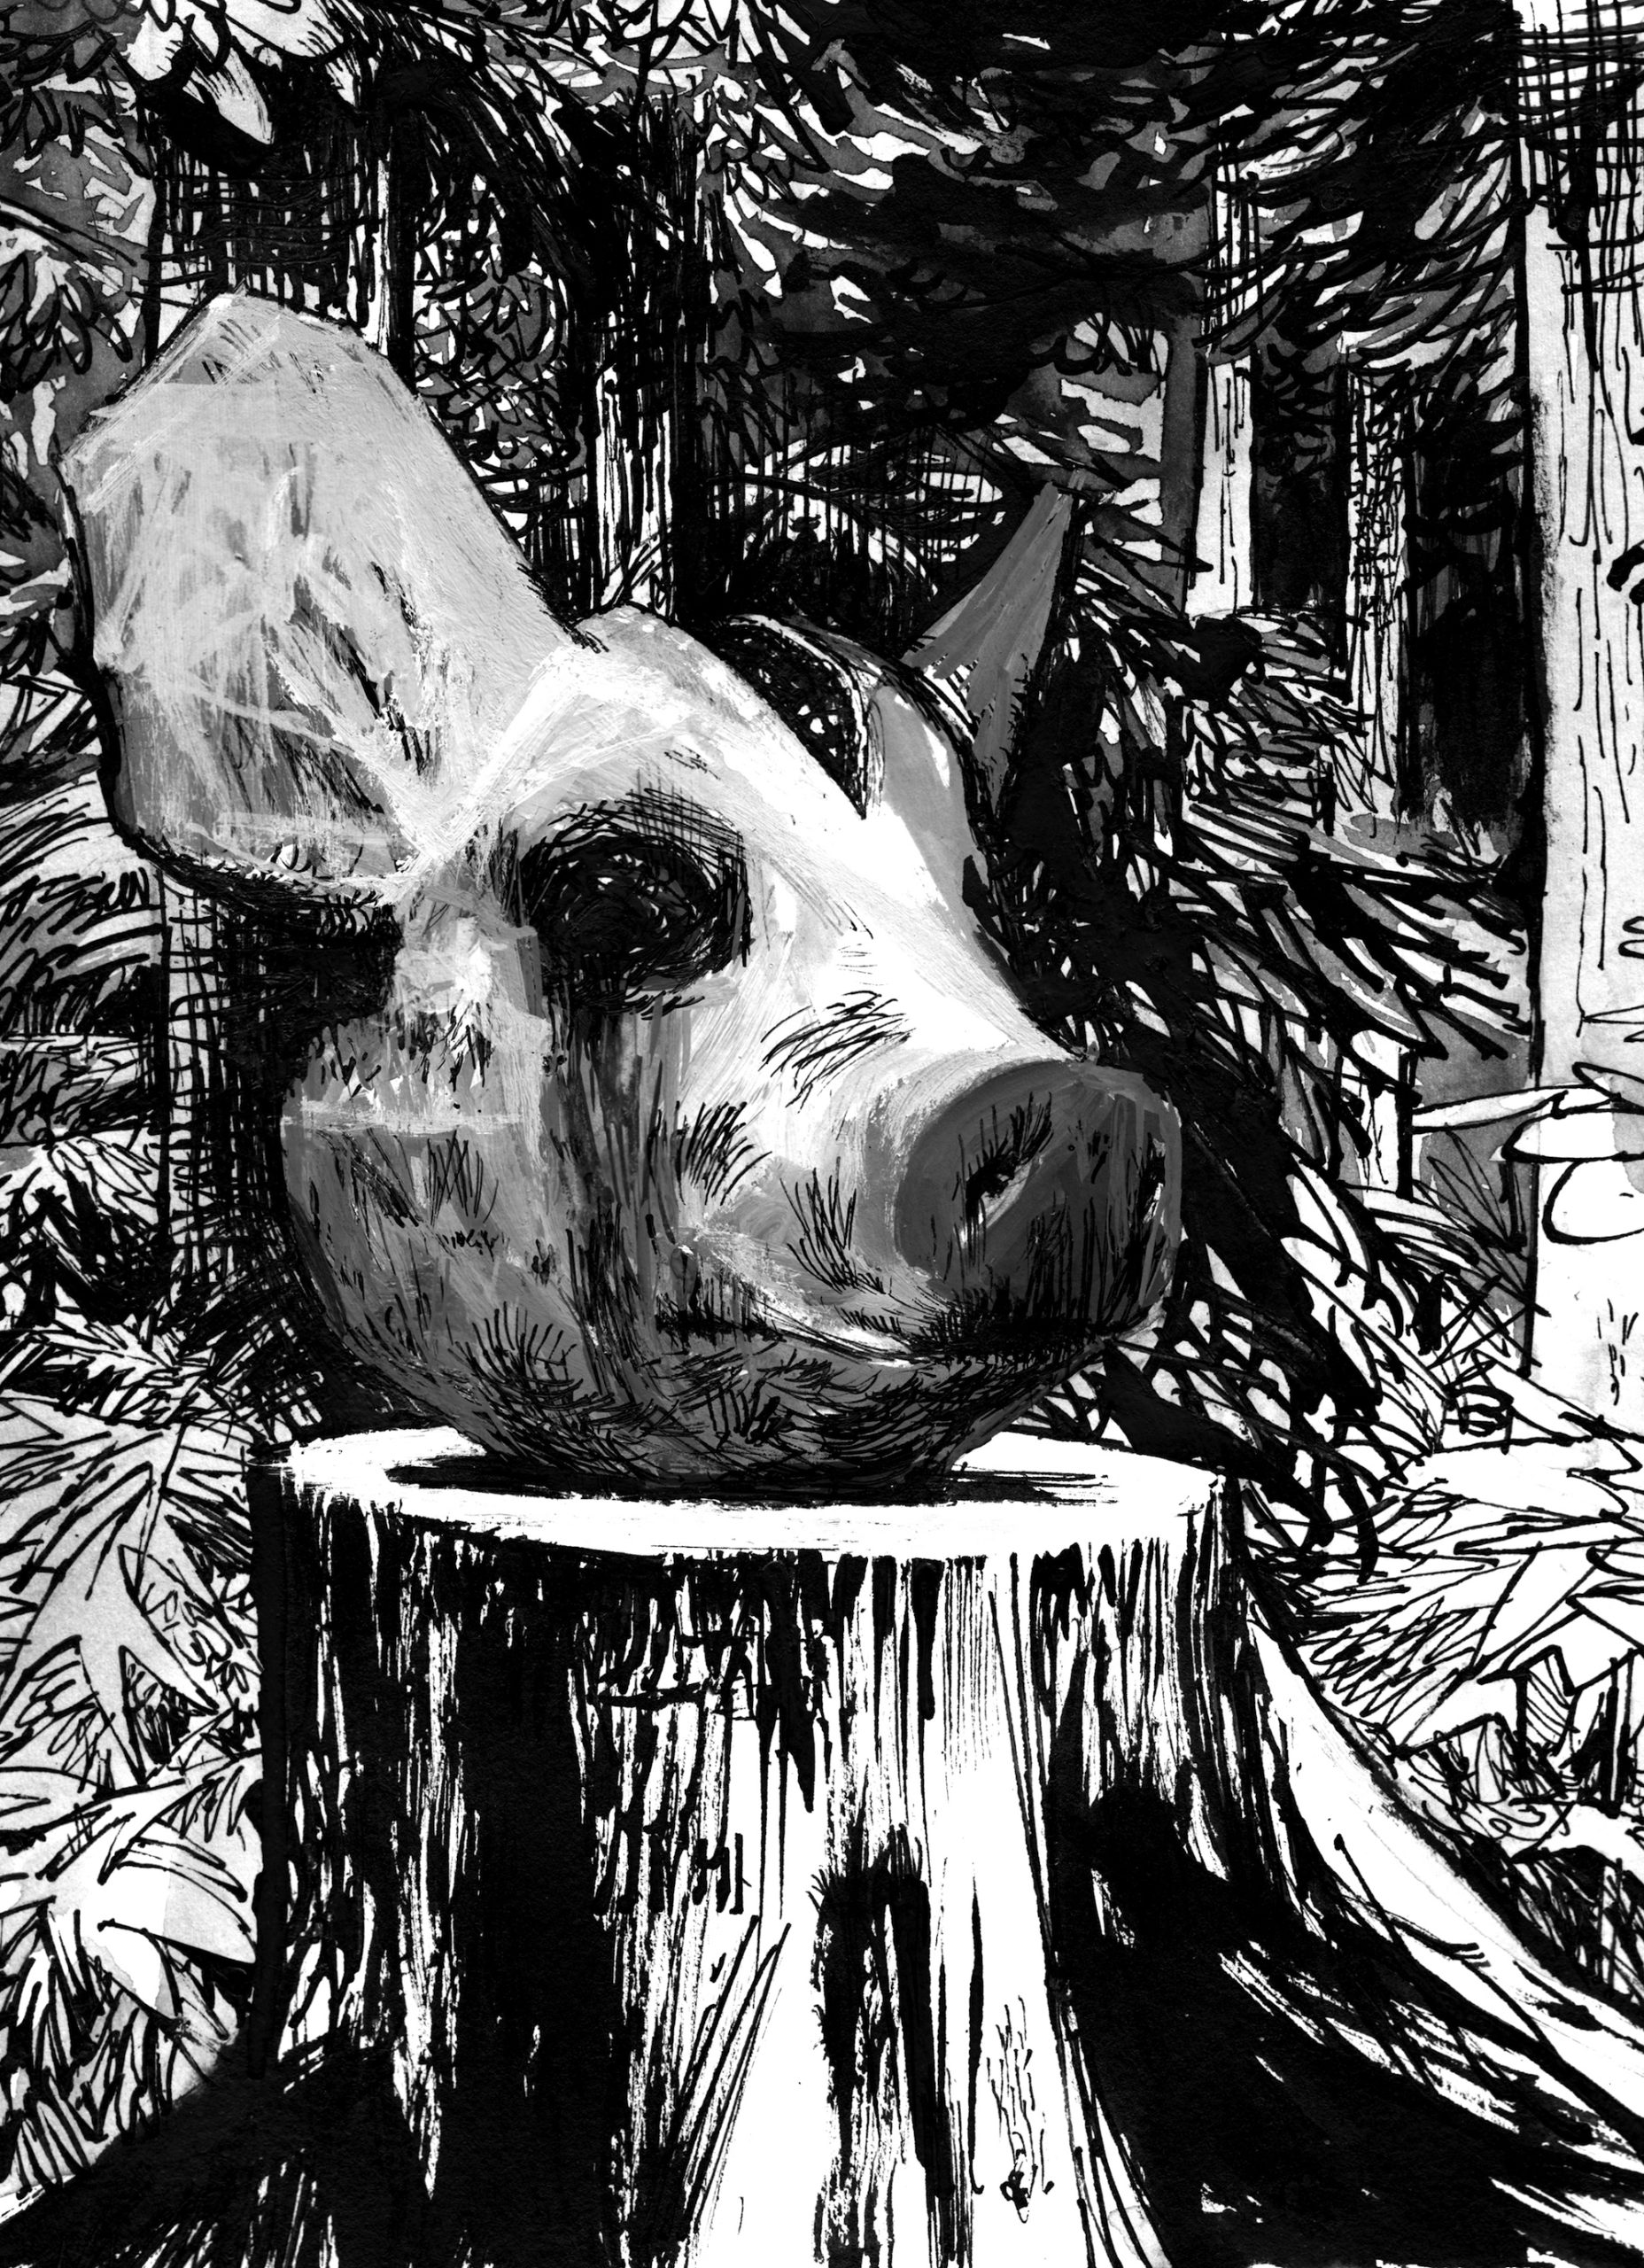 lord of the flies pig head